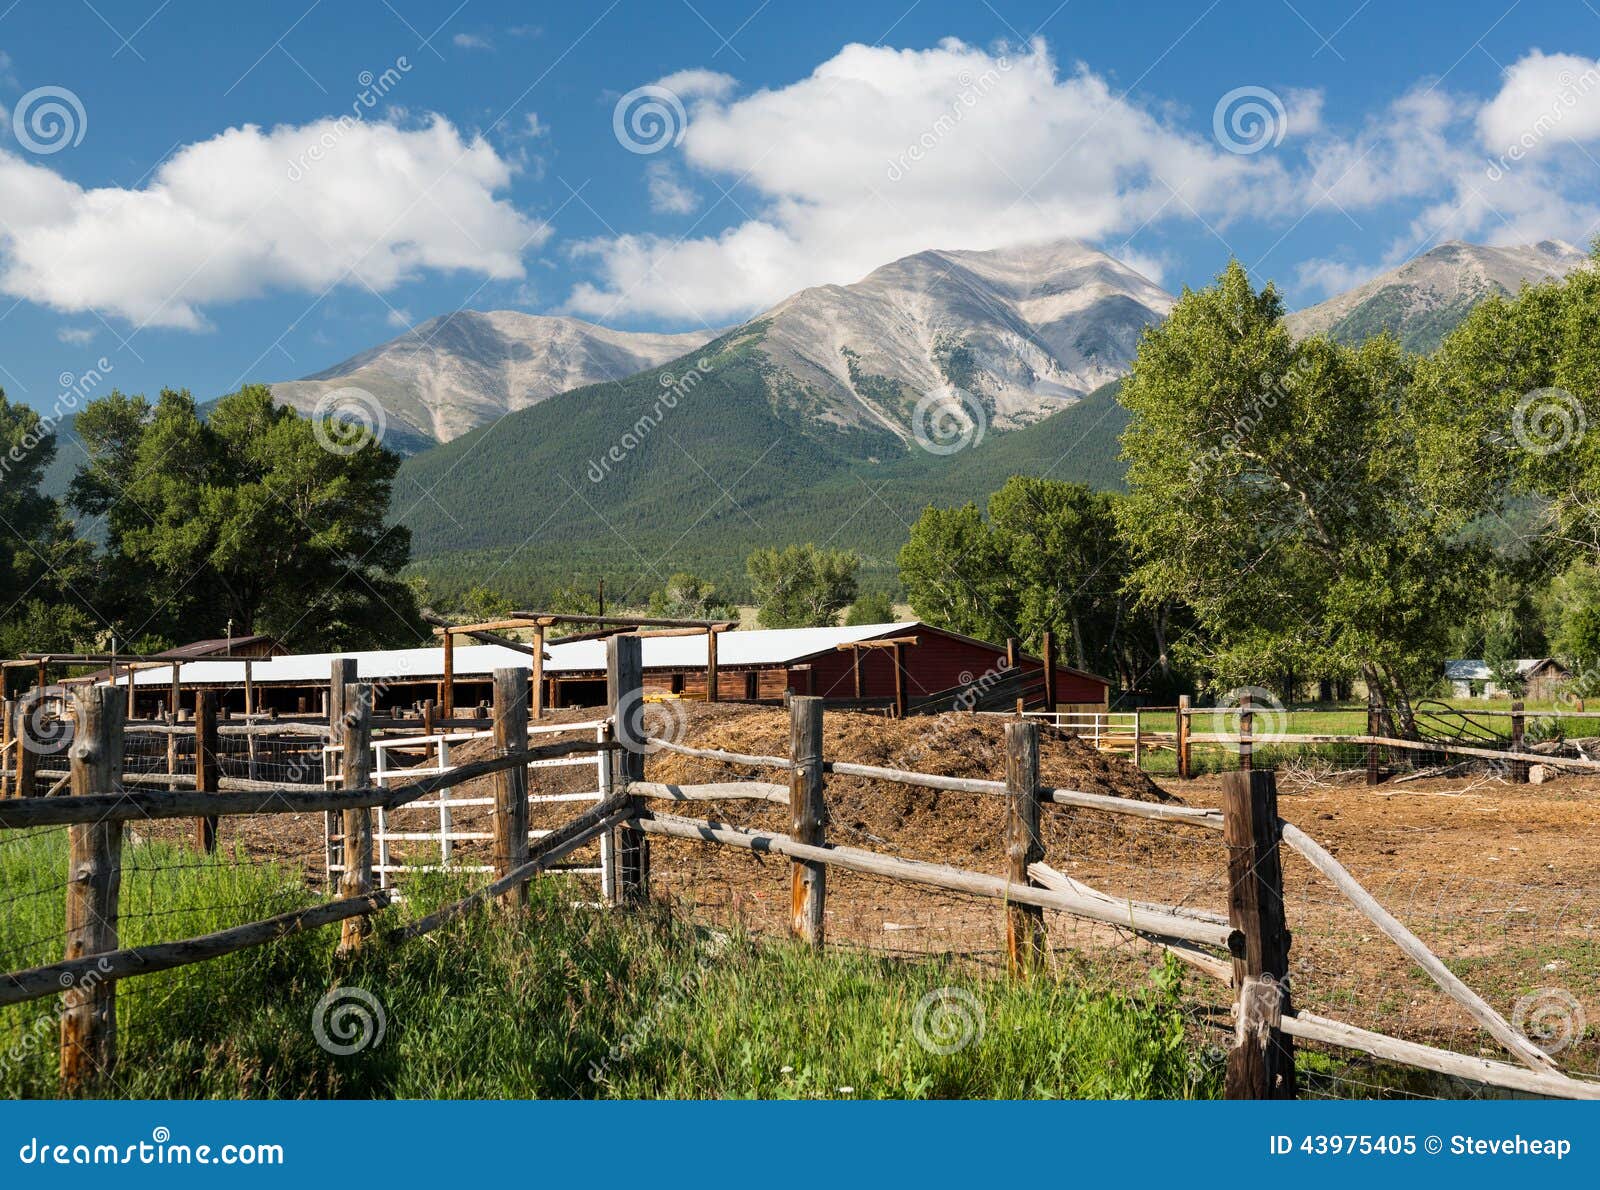 farmyard and stable by mt princeton co